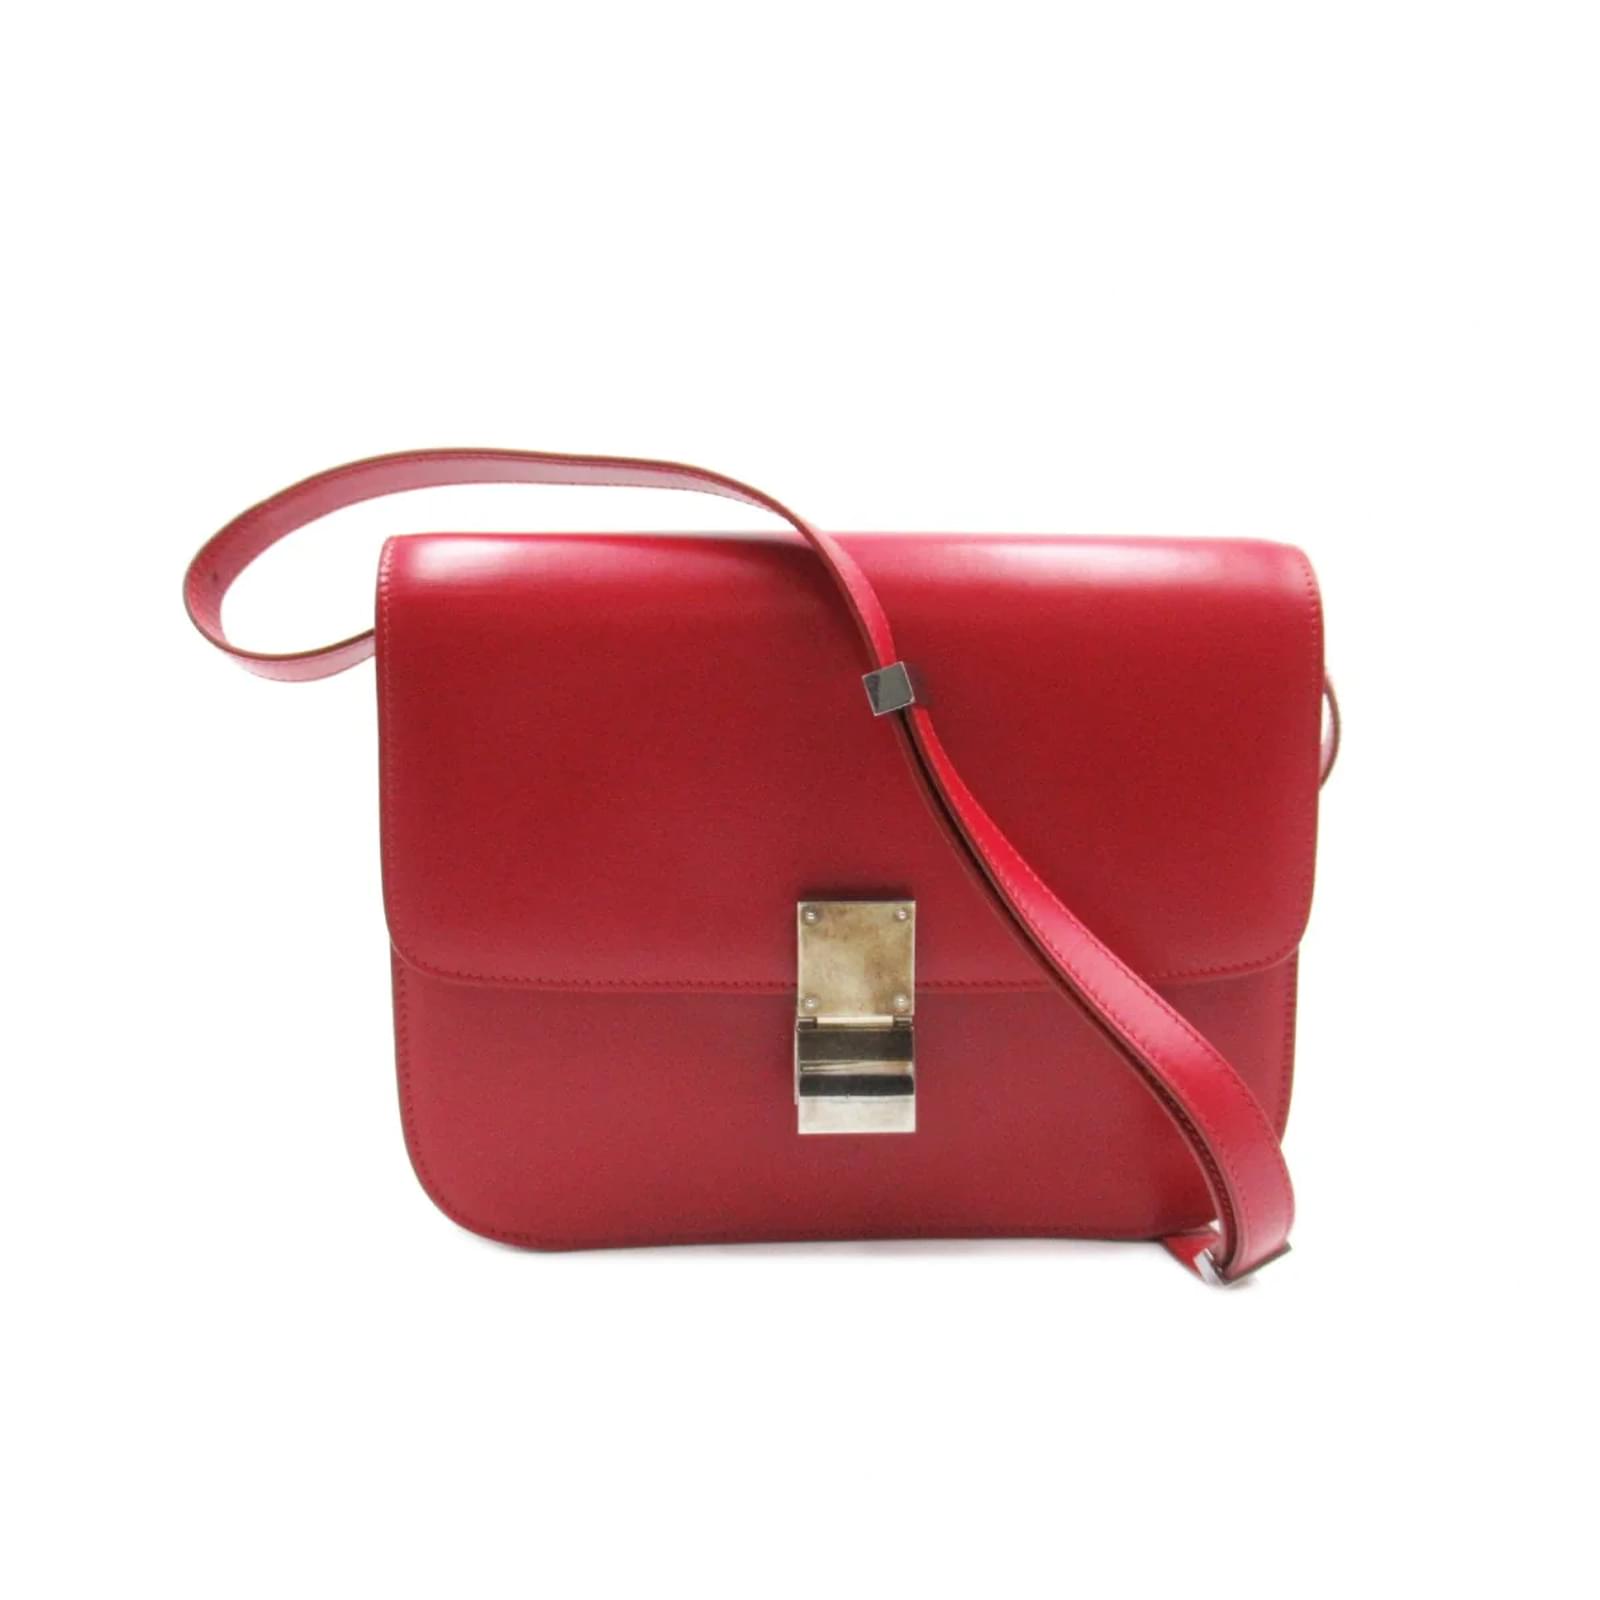 CÉLINE Women's Box Bag Leather in Red | Second Hand